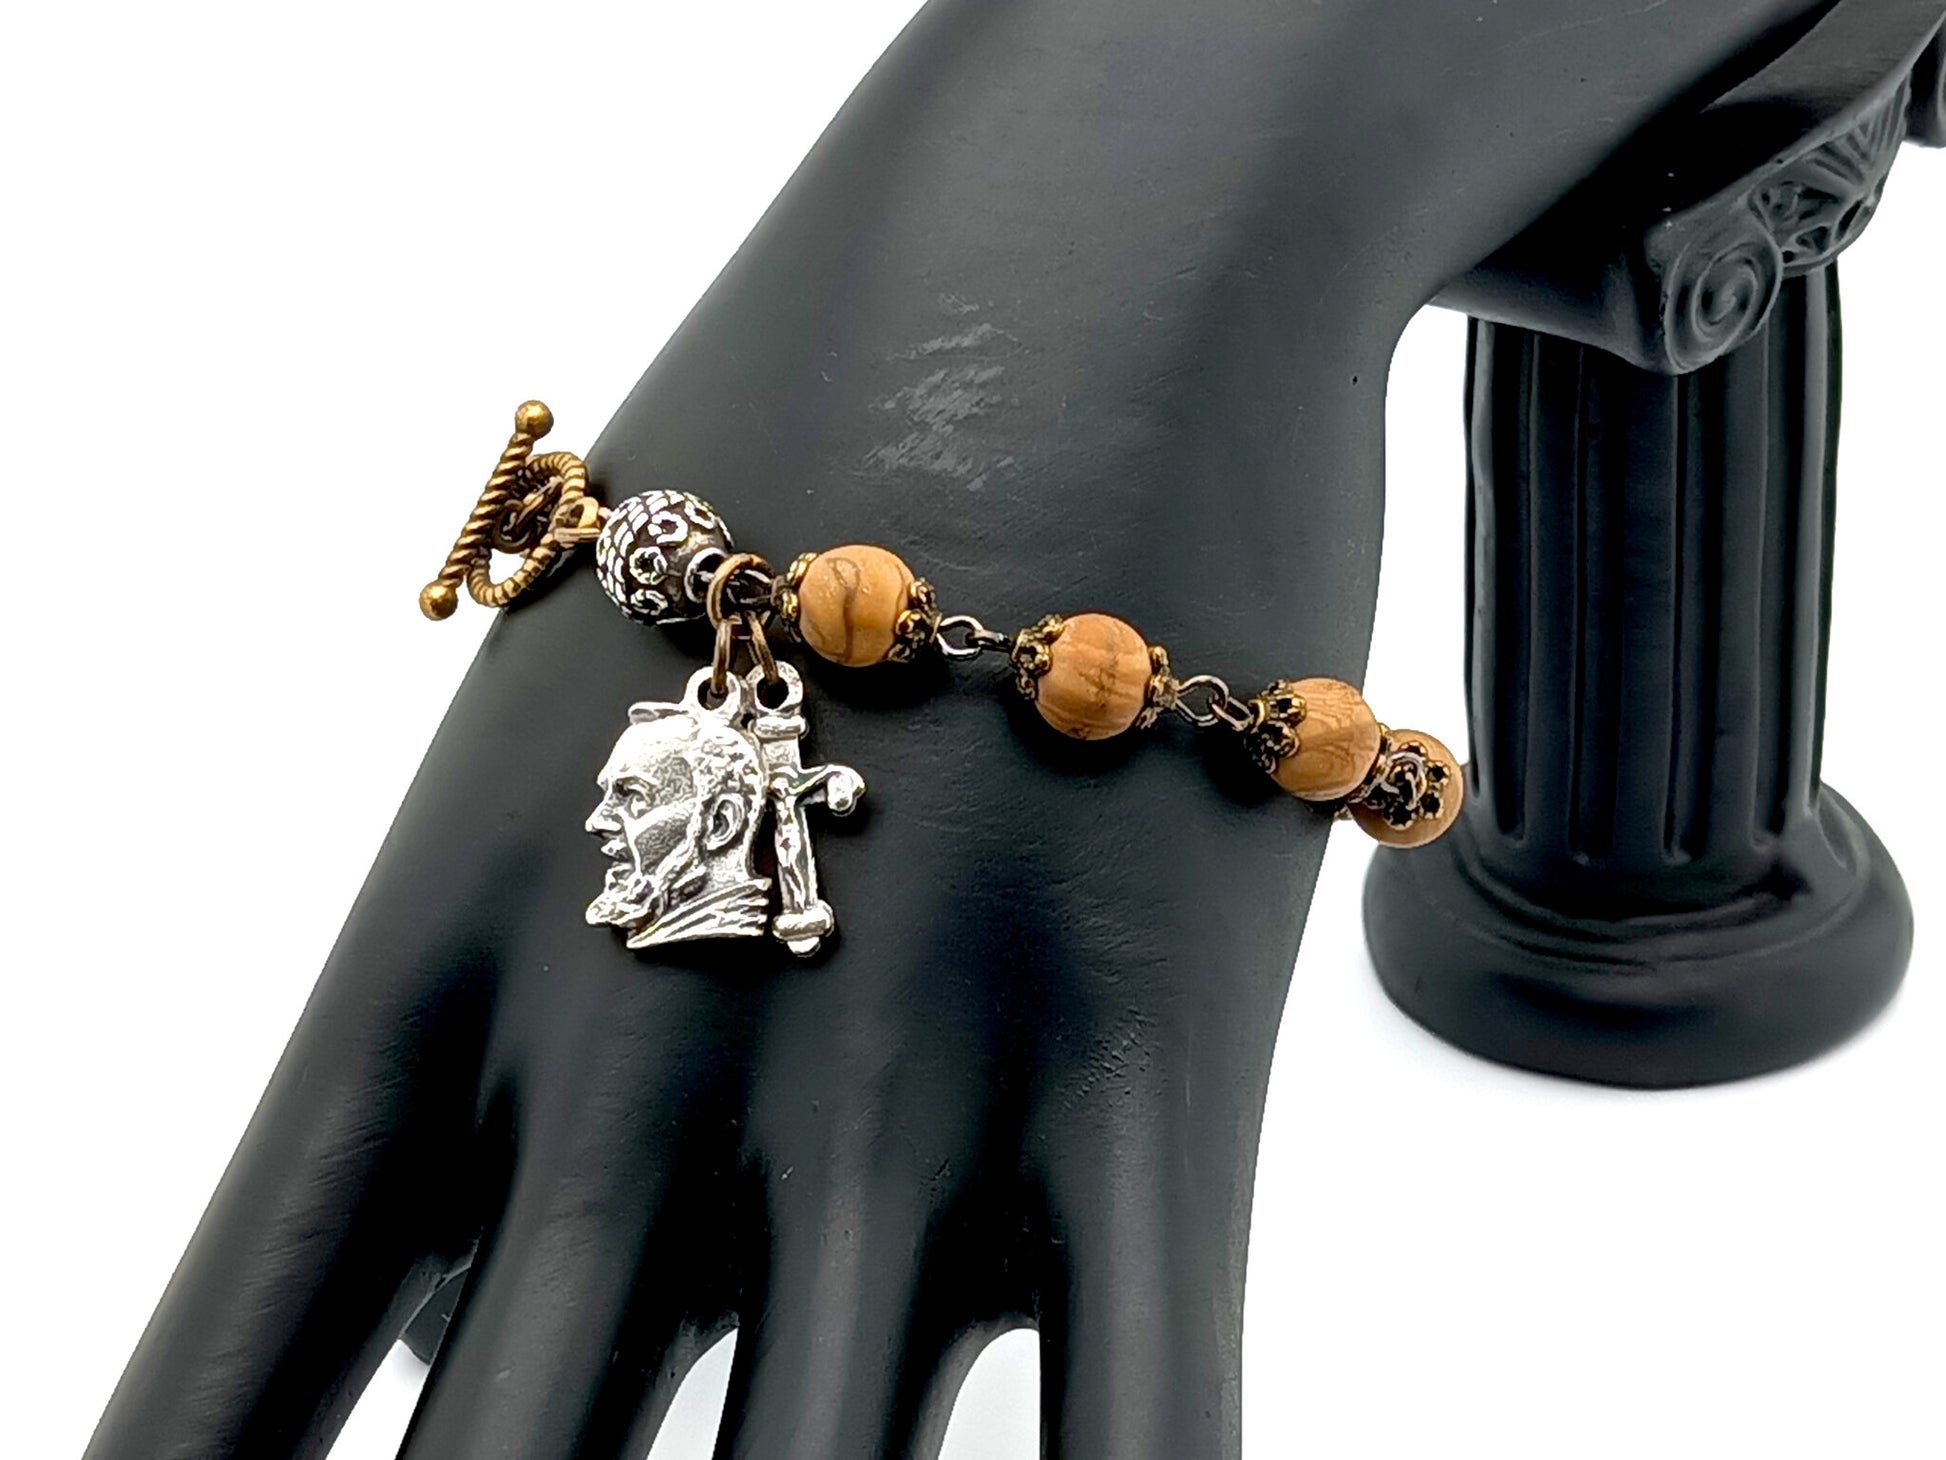 Saint Padre Pio unique rosary beads single decade rosary bracelet with sand wood gemstone and silver beads, silver crucifix and medal and brass toggle clasp. 